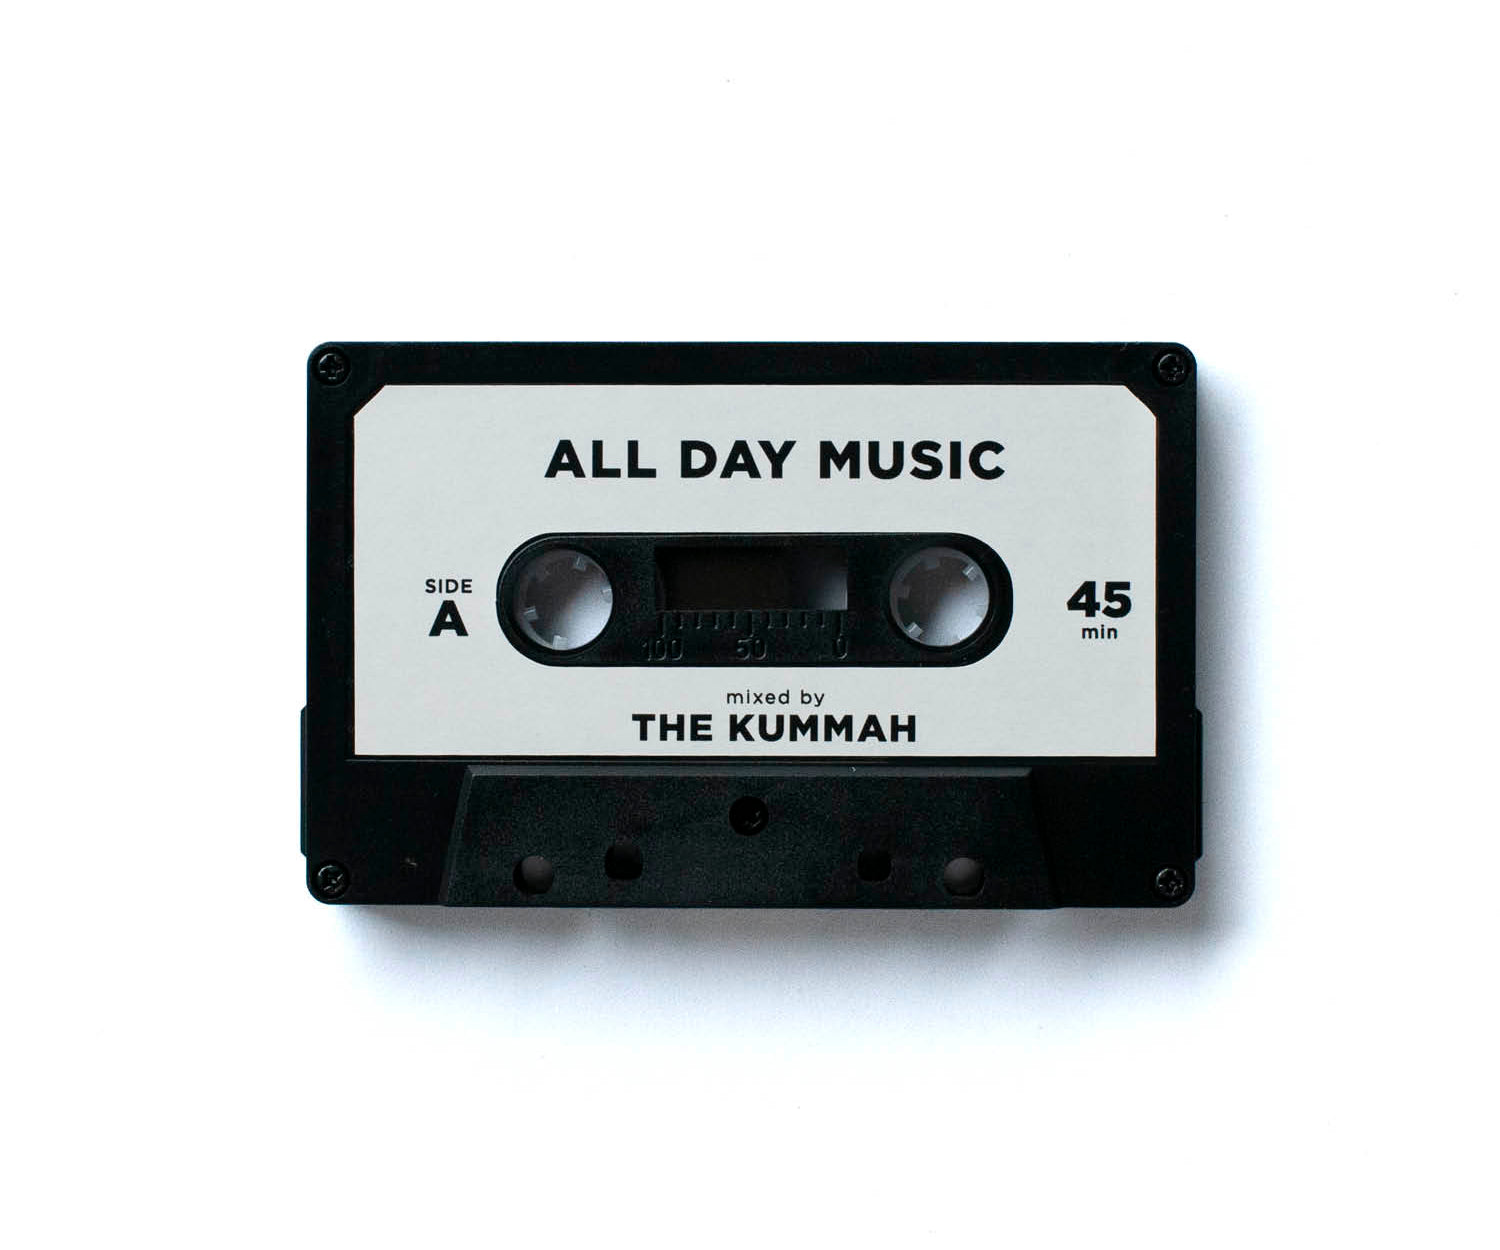 A.D.M. #15 - Mixed by THE KUMMAH | LIKE THIS SHOP